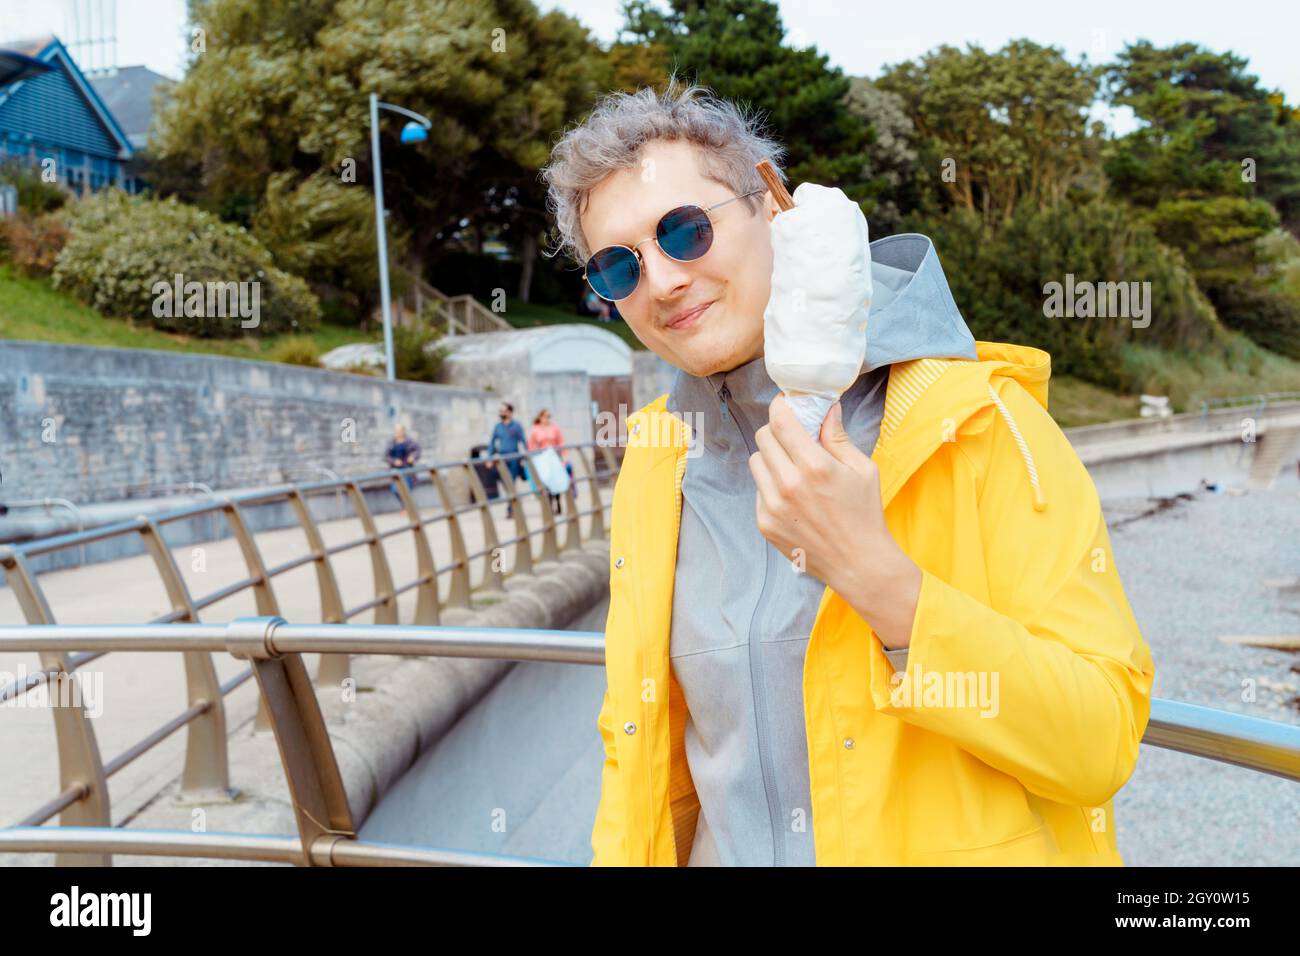 Excited caucasian young male tourist in dark sunglasses and yellow raincoat eating huge ice cream in a waffle cone during a walk near seaside. Positiv Stock Photo